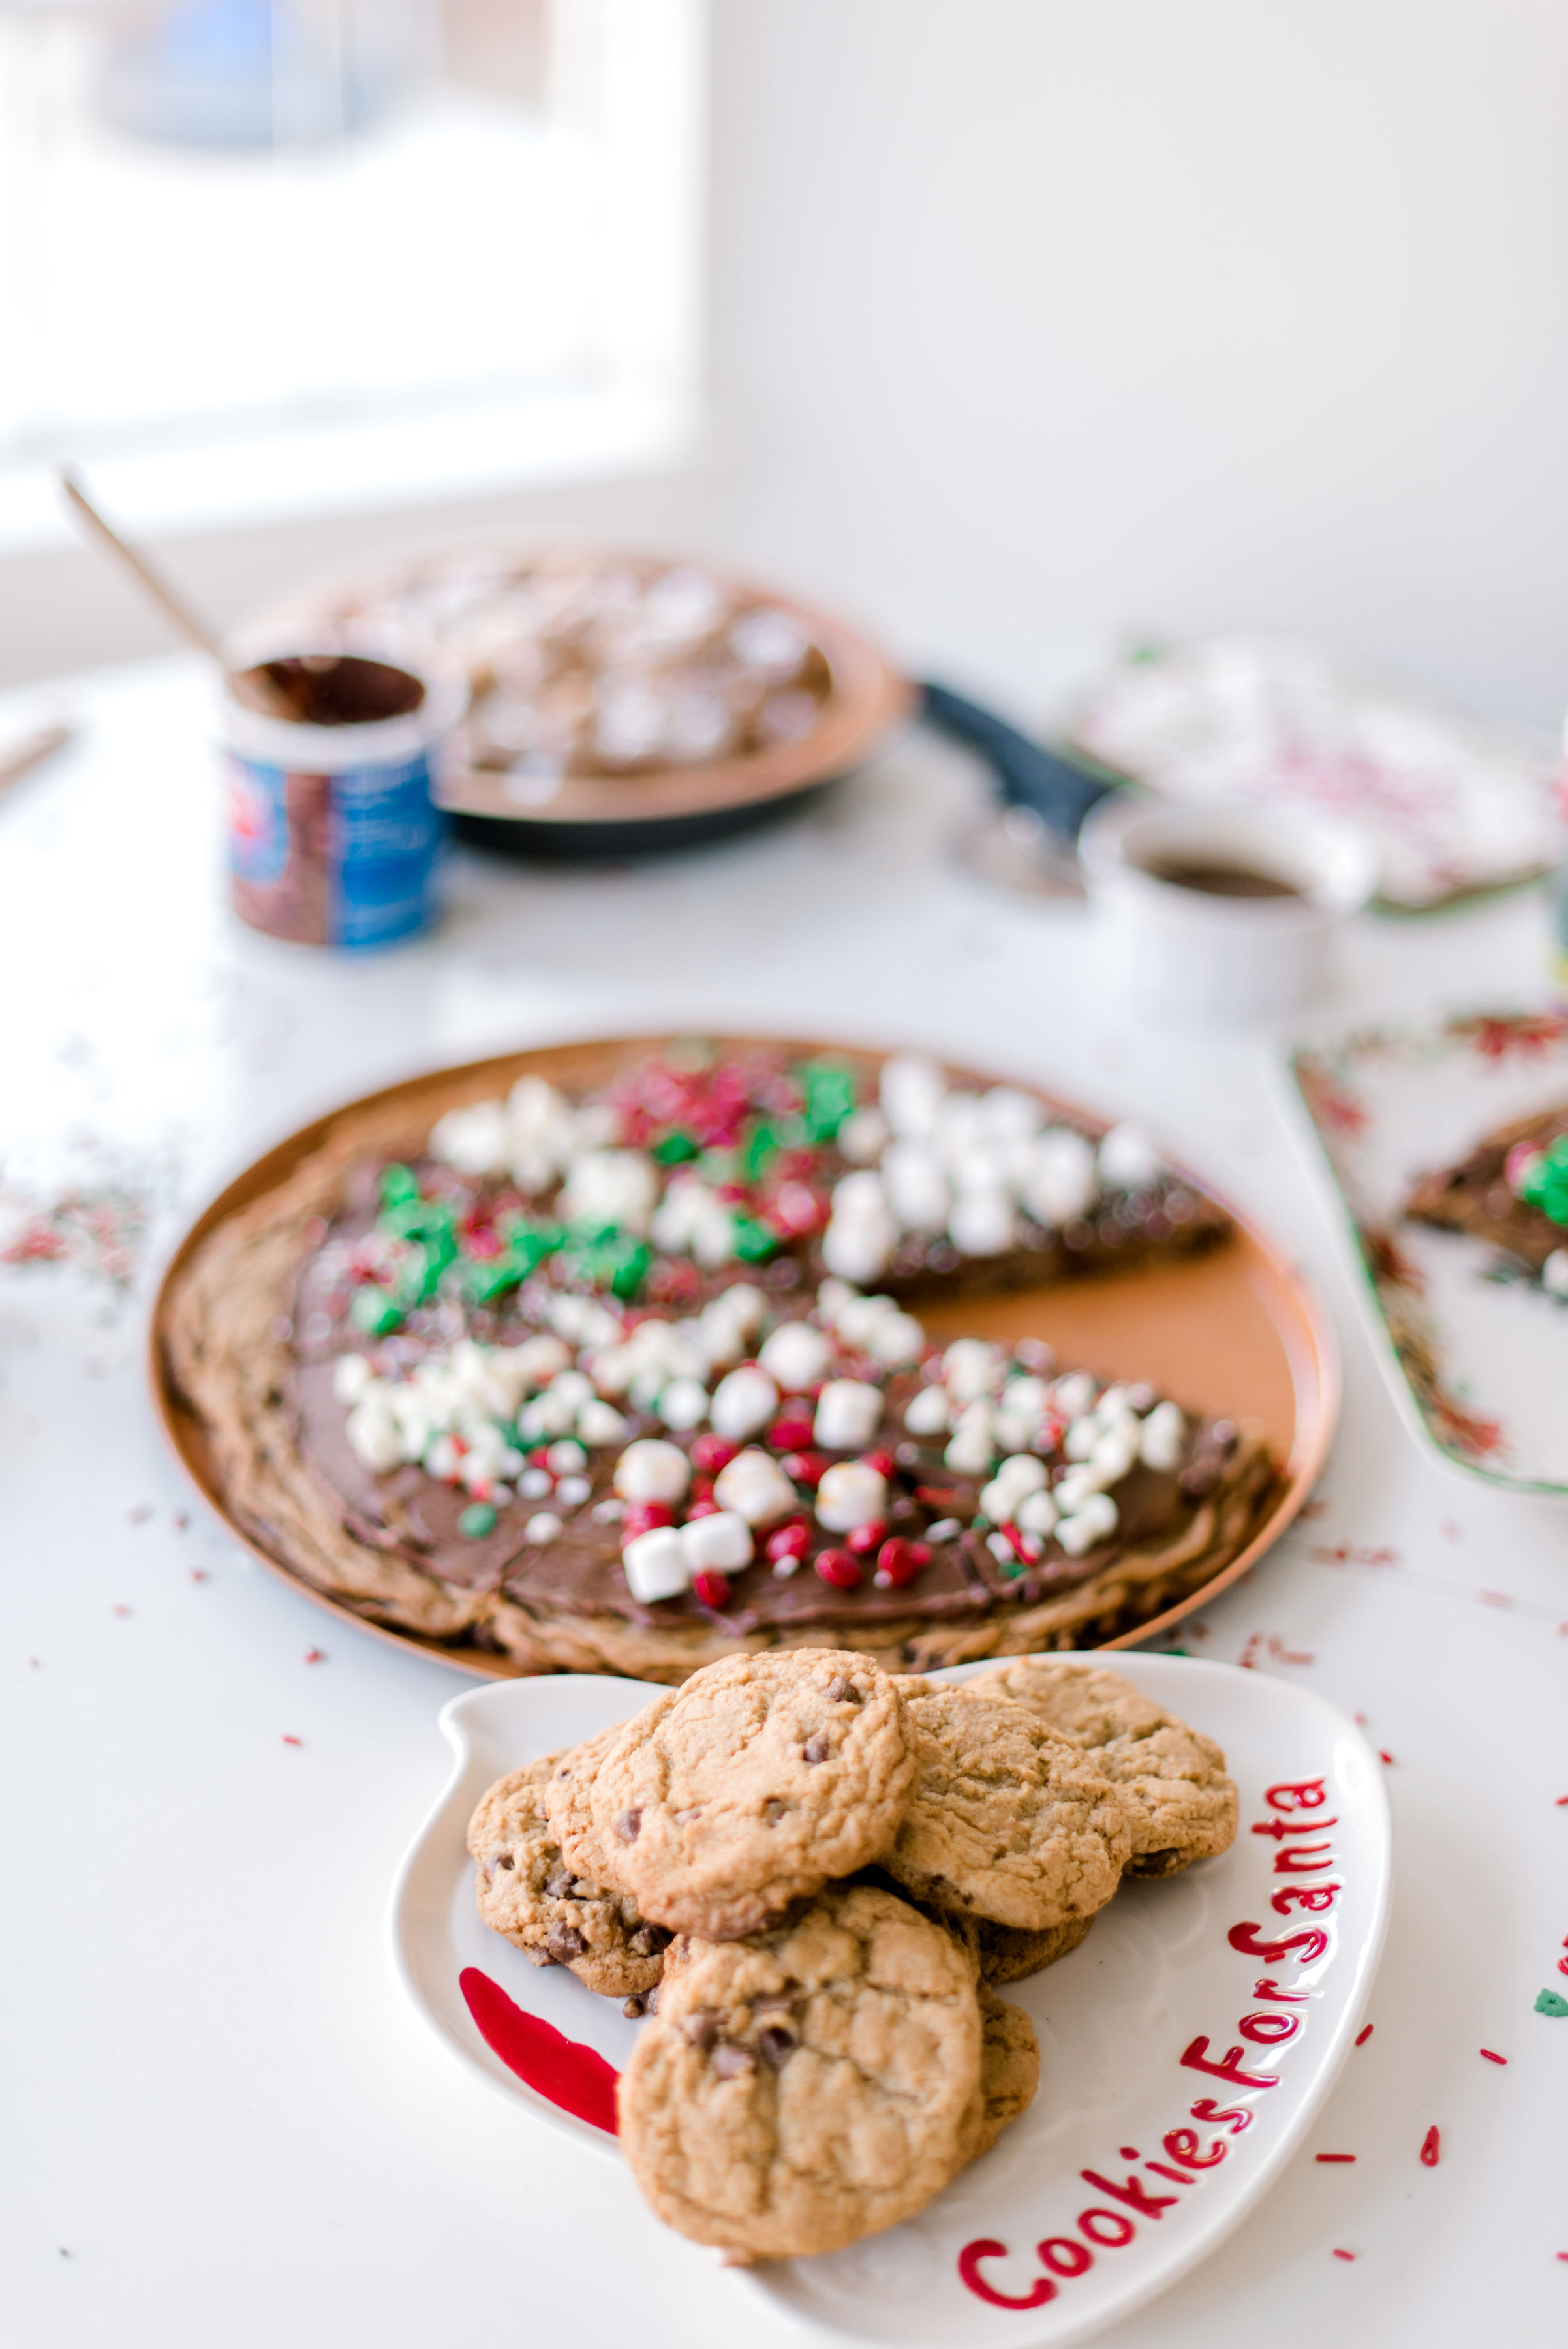 Easy HChristmas Cookie Decorating Partyoliday Recipes